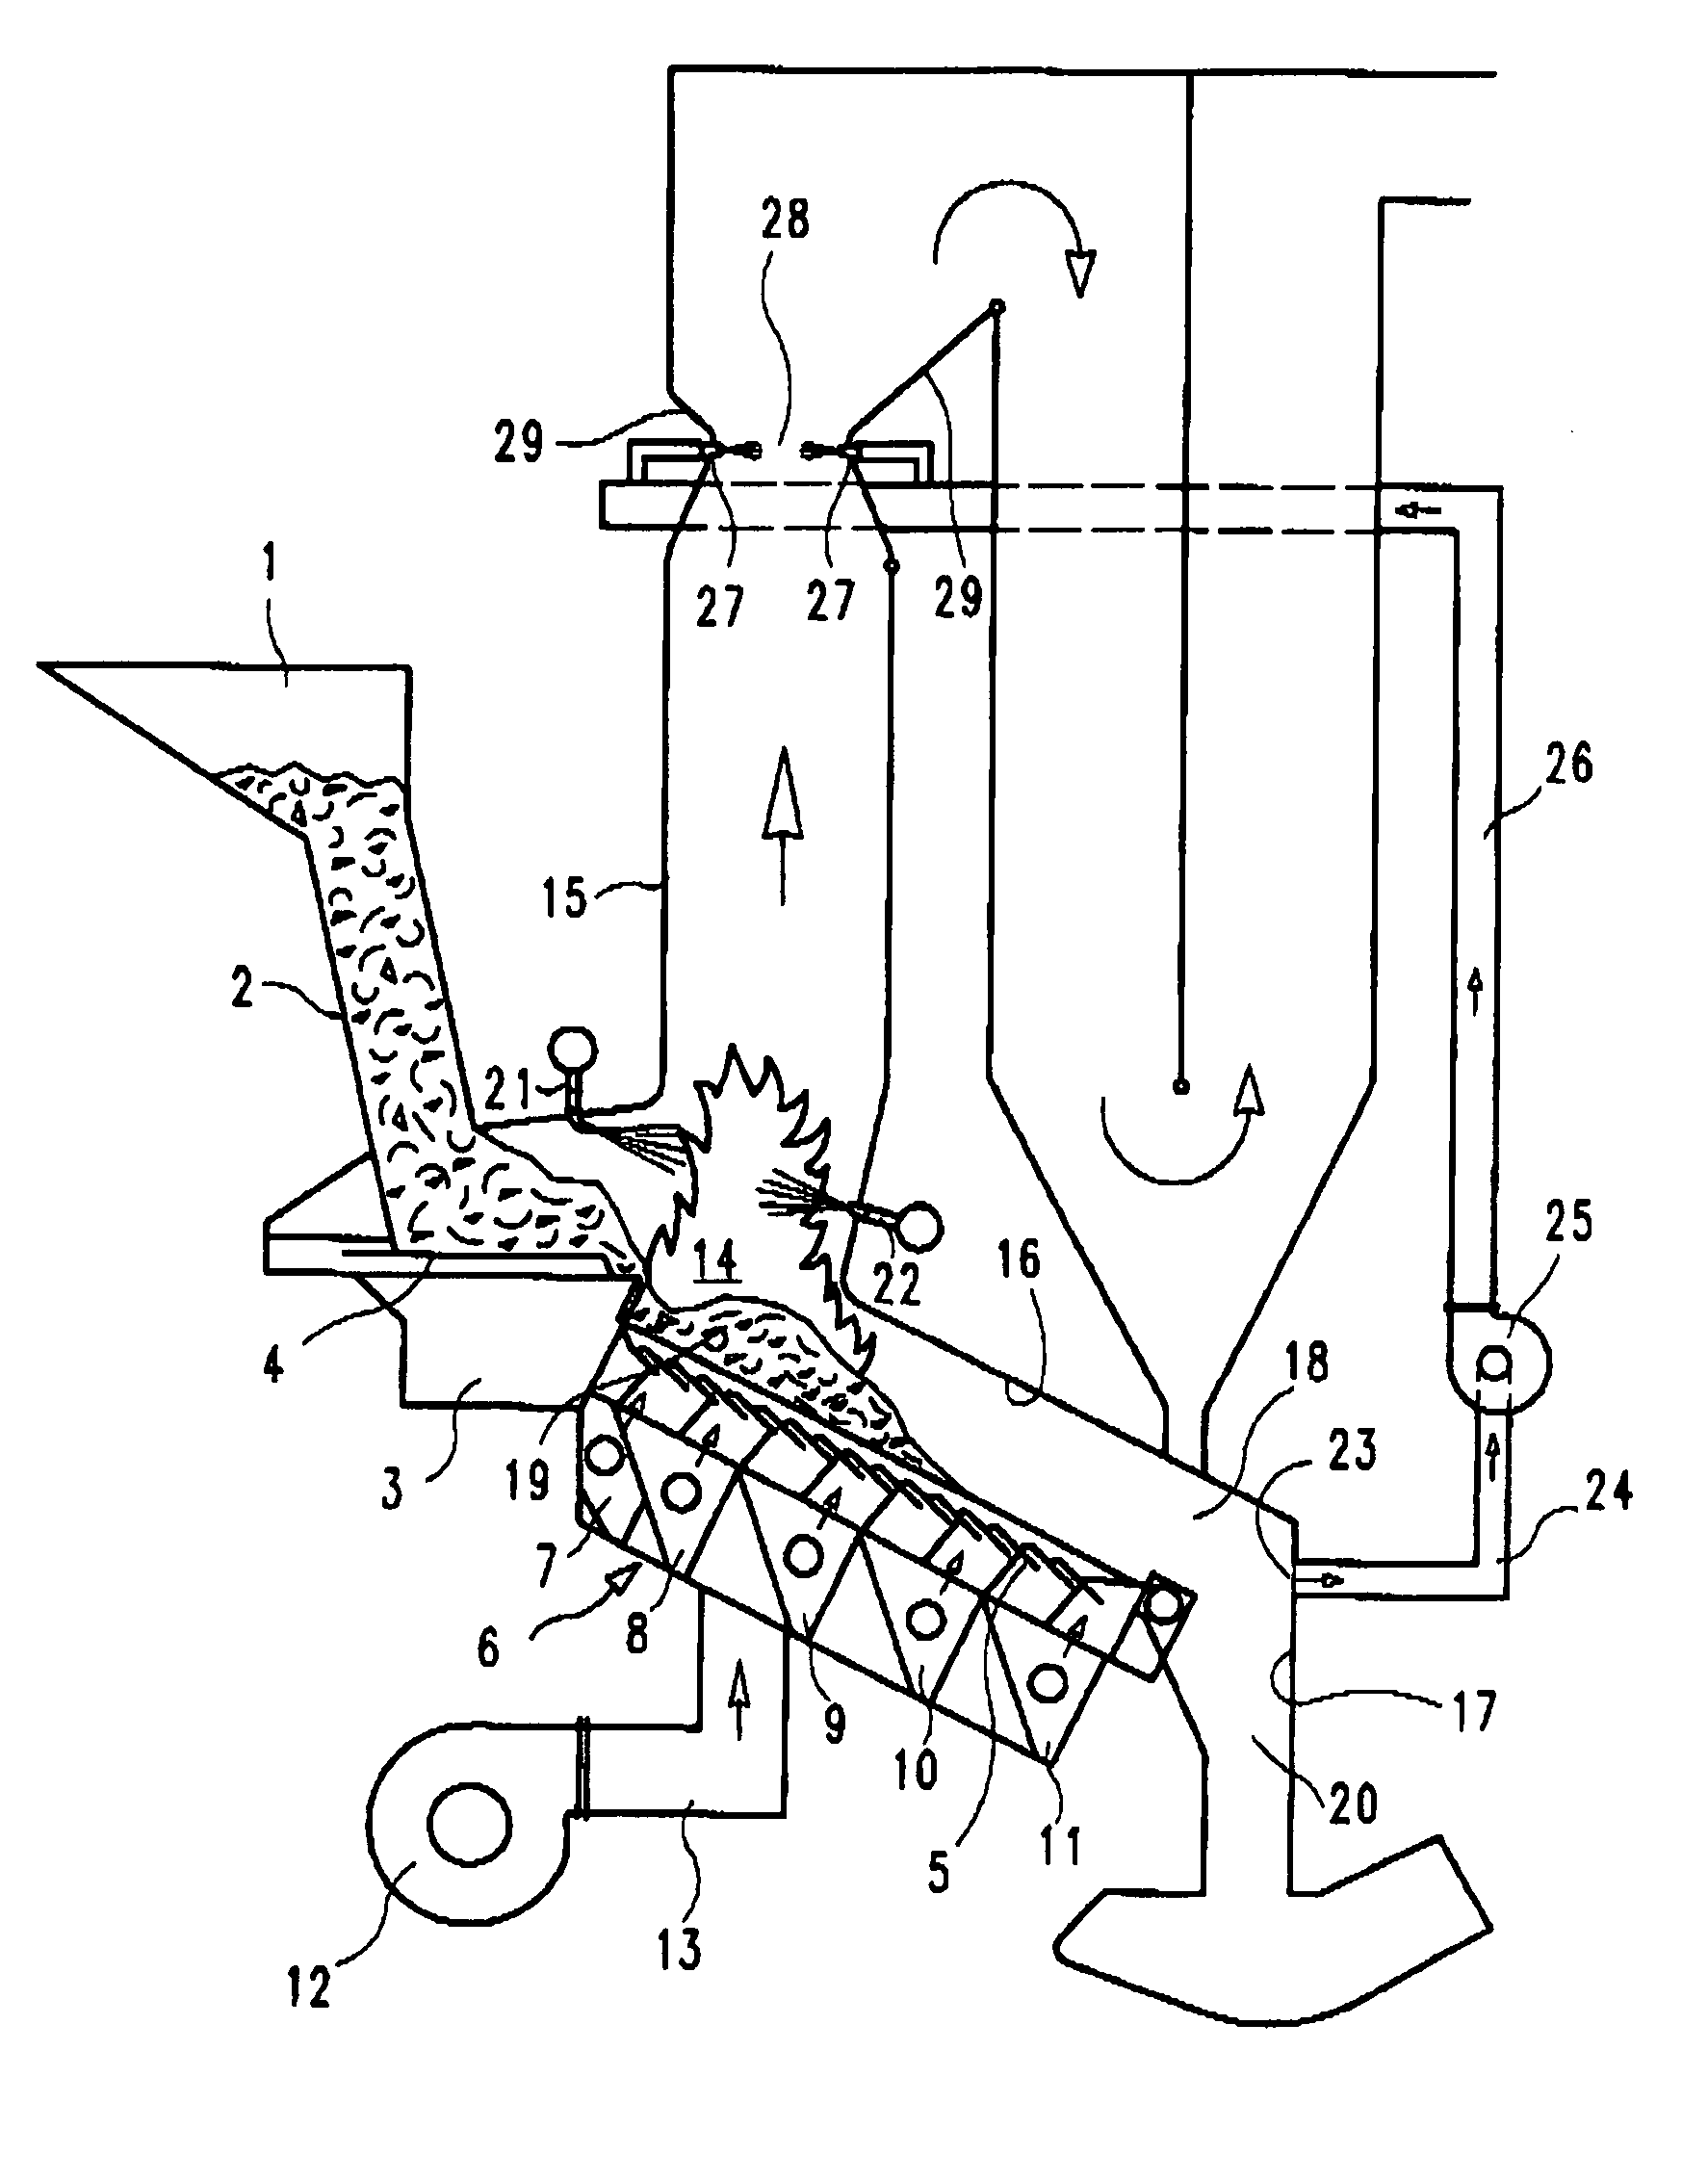 Method for supplying combustion gas in incineration systems